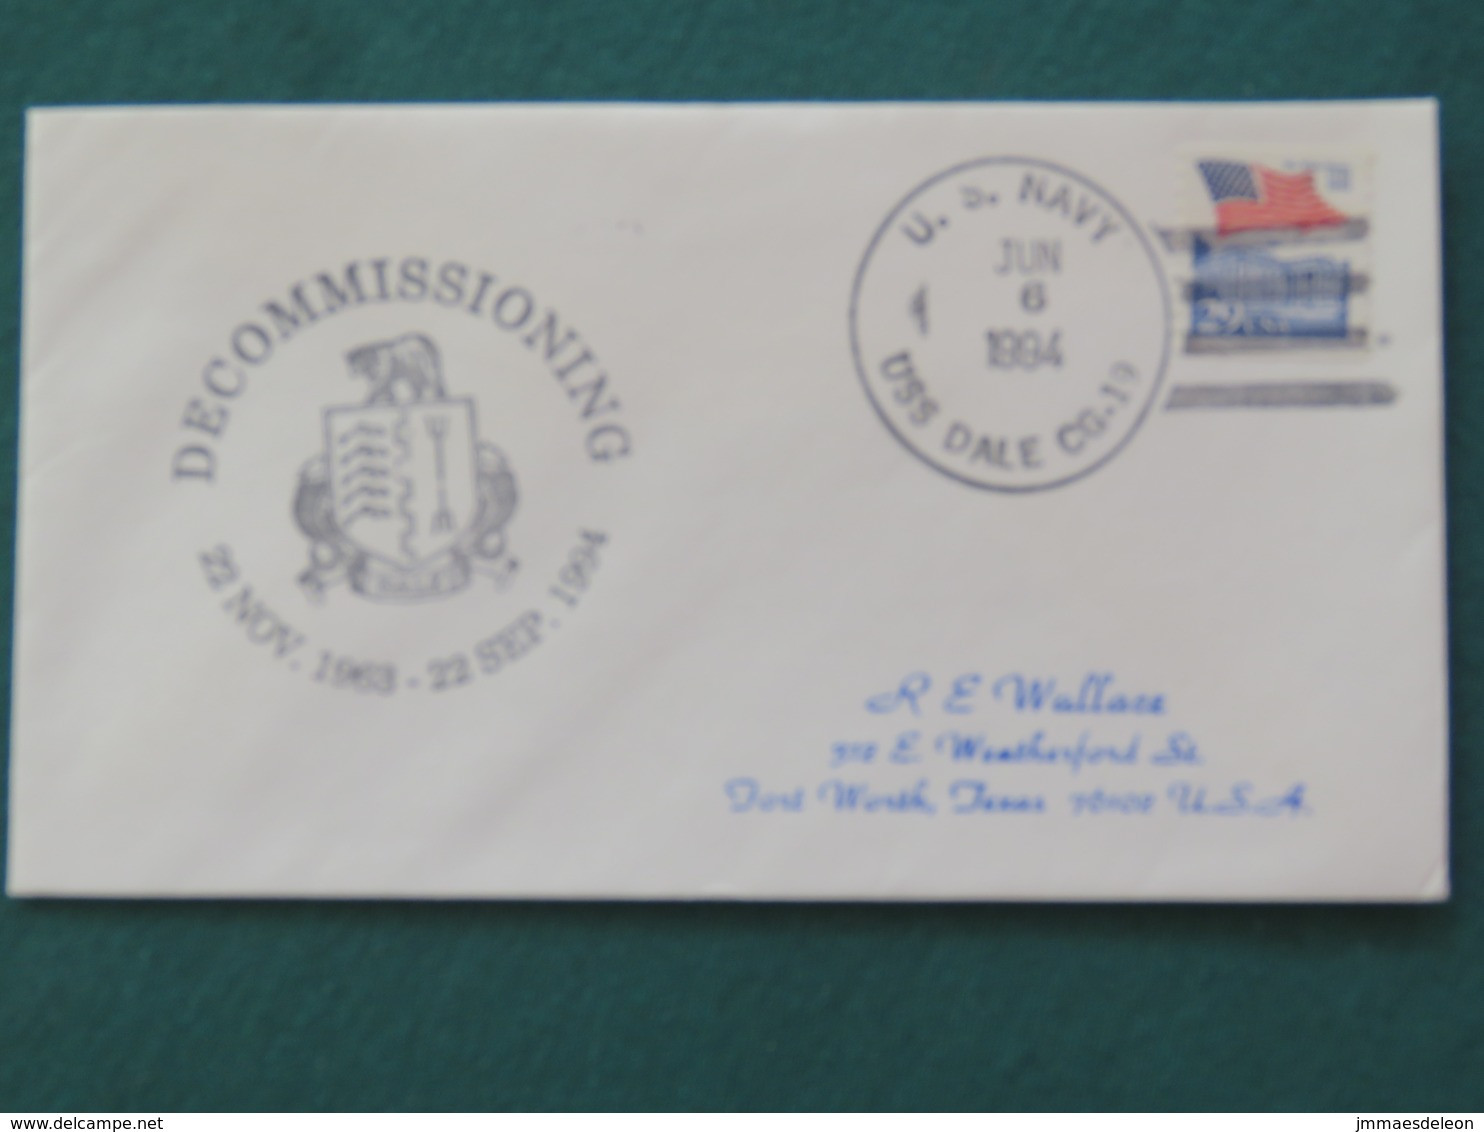 USA 1992 Cover From Ship USS Dale In Mission In Desert Storm To Texas - Flag - Briefe U. Dokumente